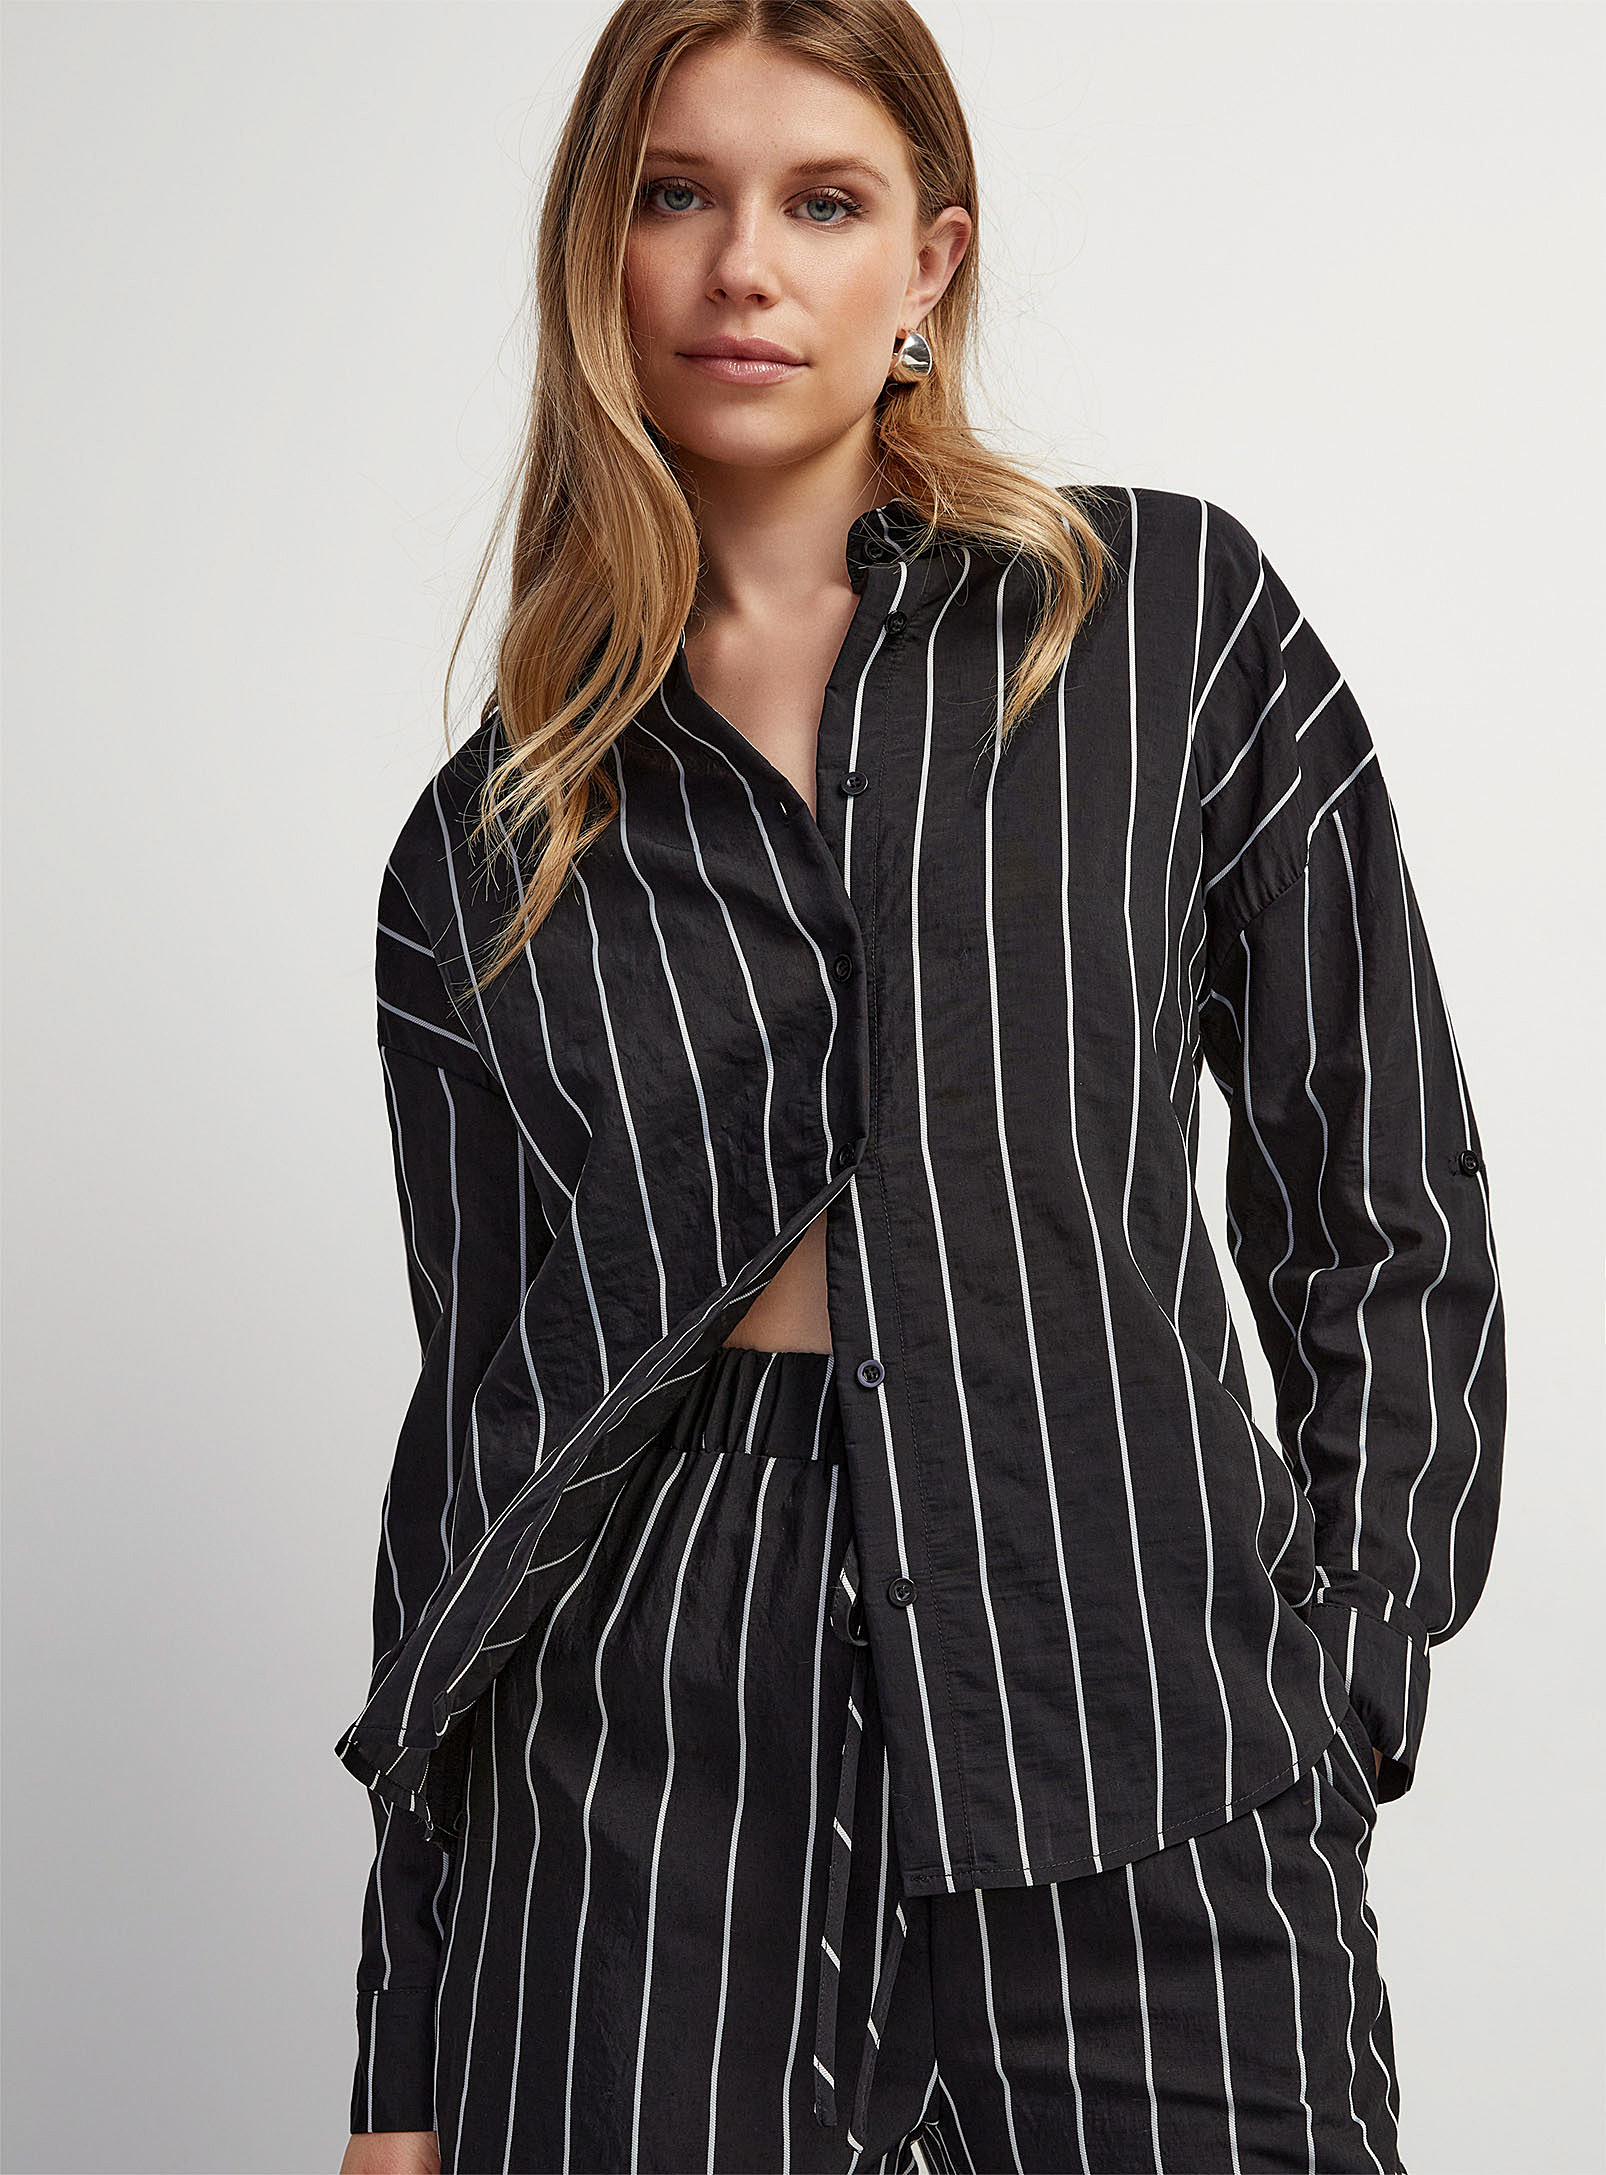 Icone Contrasting Stripes Loose Shirt In Black And White